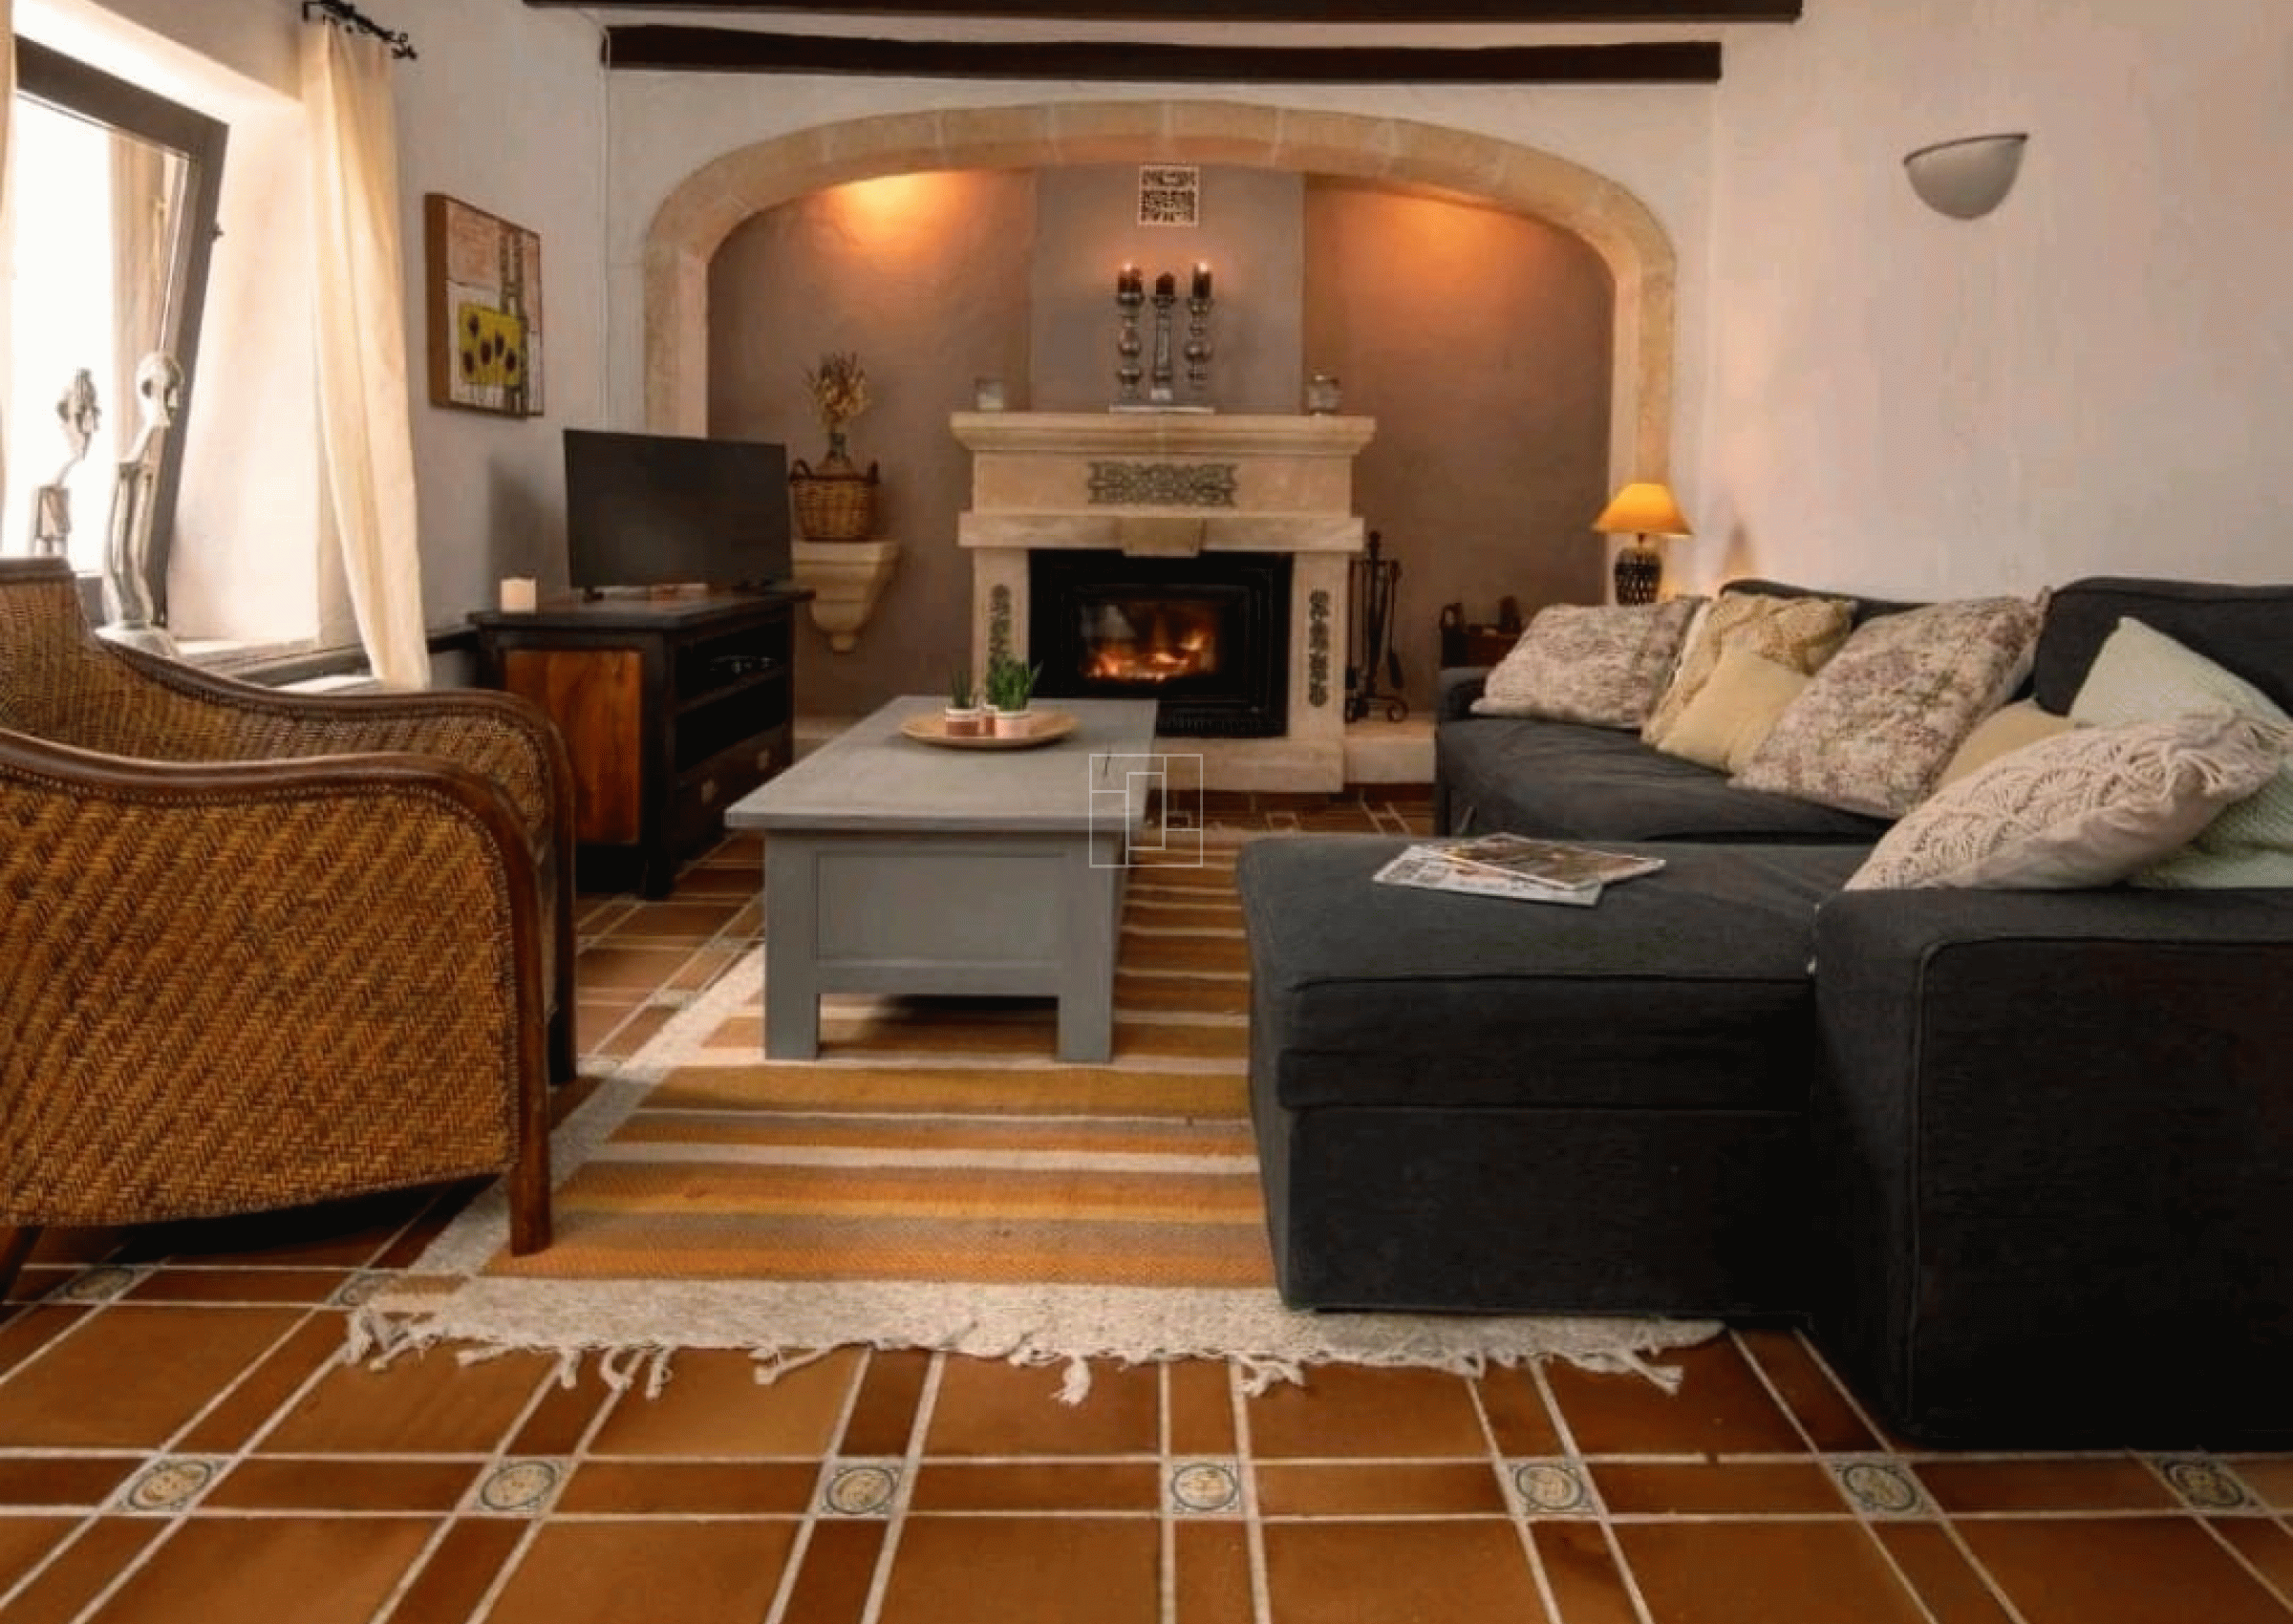 Spacious authentic country house in Pedreguer